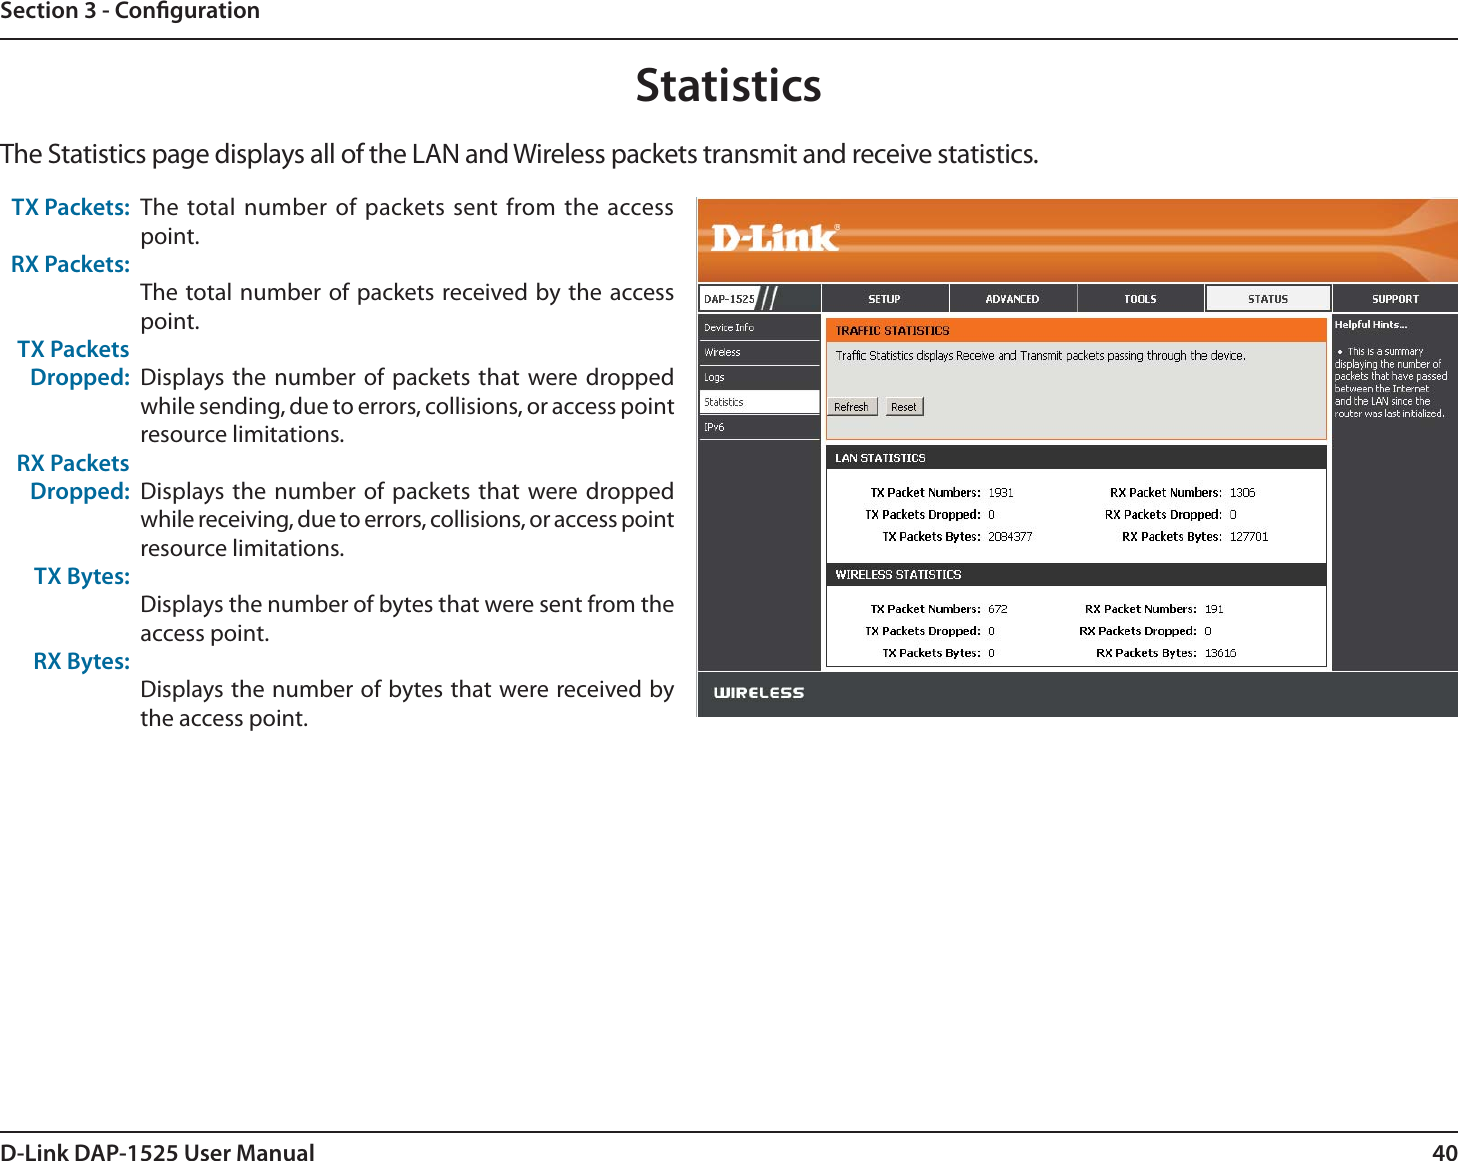 40D-Link DAP-1525 User ManualSection 3 - CongurationStatisticsThe Statistics page displays all of the LAN and Wireless packets transmit and receive statistics.TX Packets:RX Packets:TX Packets Dropped:RX Packets Dropped:TX Bytes:RX Bytes:The total number of packets sent from the access point. The total number of packets received by the access point.Displays the number of packets that were dropped while sending, due to errors, collisions, or access point resource limitations.Displays the number of packets that were dropped while receiving, due to errors, collisions, or access point resource limitations.Displays the number of bytes that were sent from the access point.Displays the number of bytes that were received by the access point.